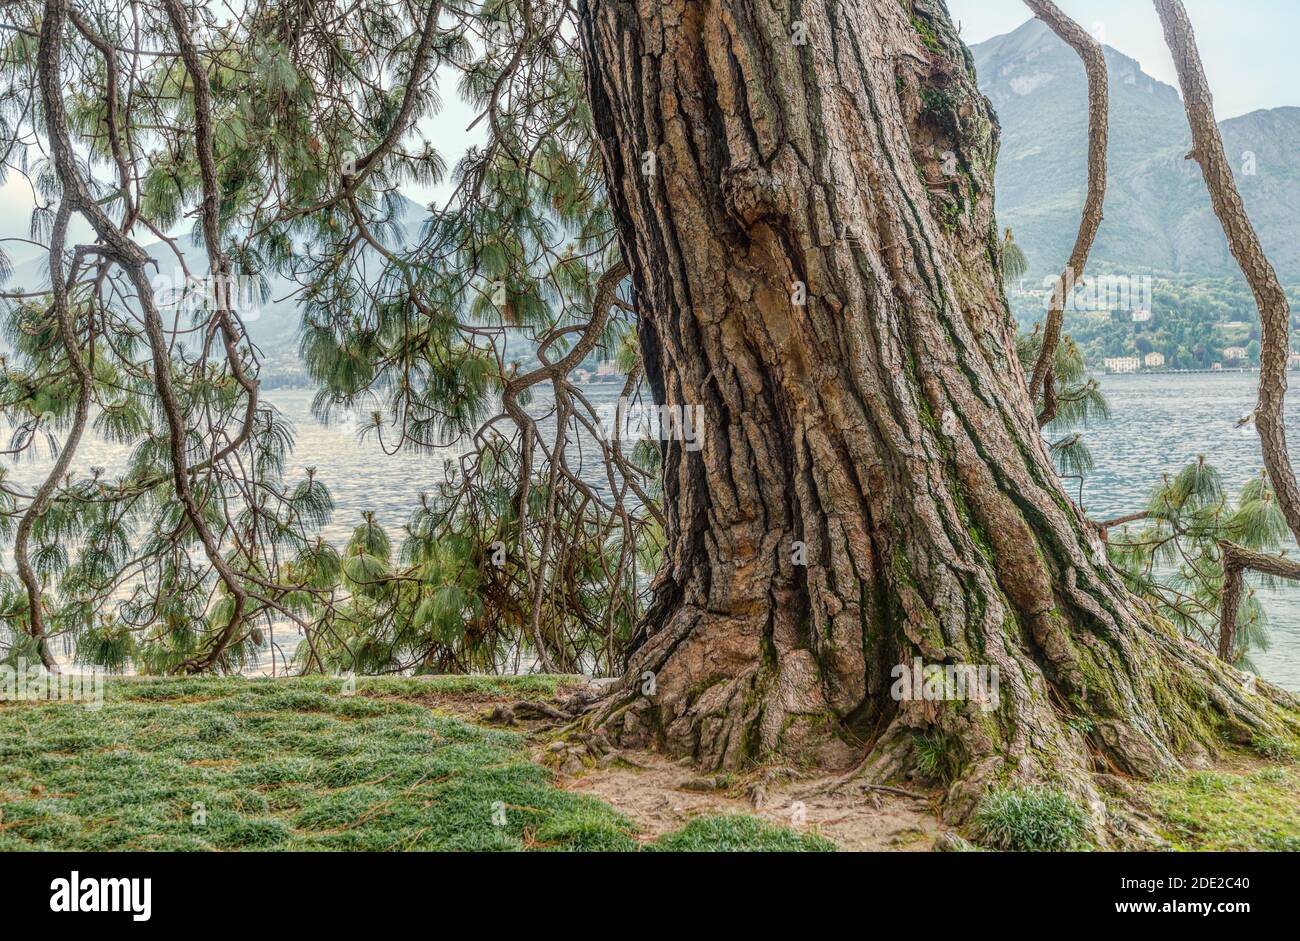 Giant trunk of the Pinus devoniana (Michoacan Pine) is a species of conifer in the Pinaceae family at the Garden of Villa Melzi, Bellagio, Italy Stock Photo